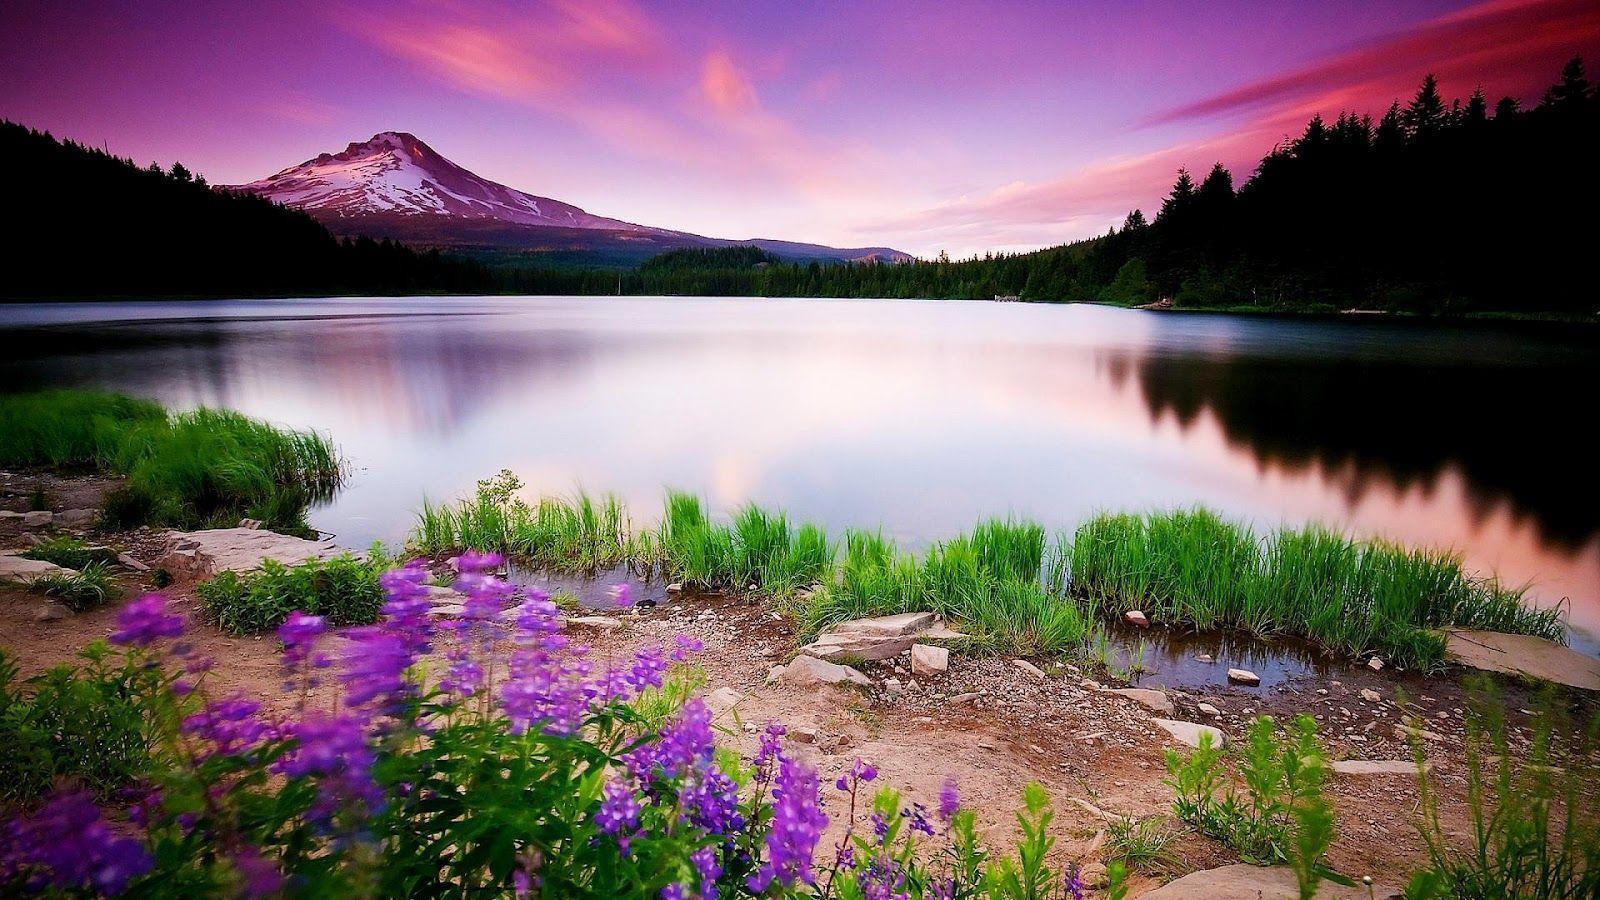 Latest and Beautiful Nature HD Wallpaper for Desktop